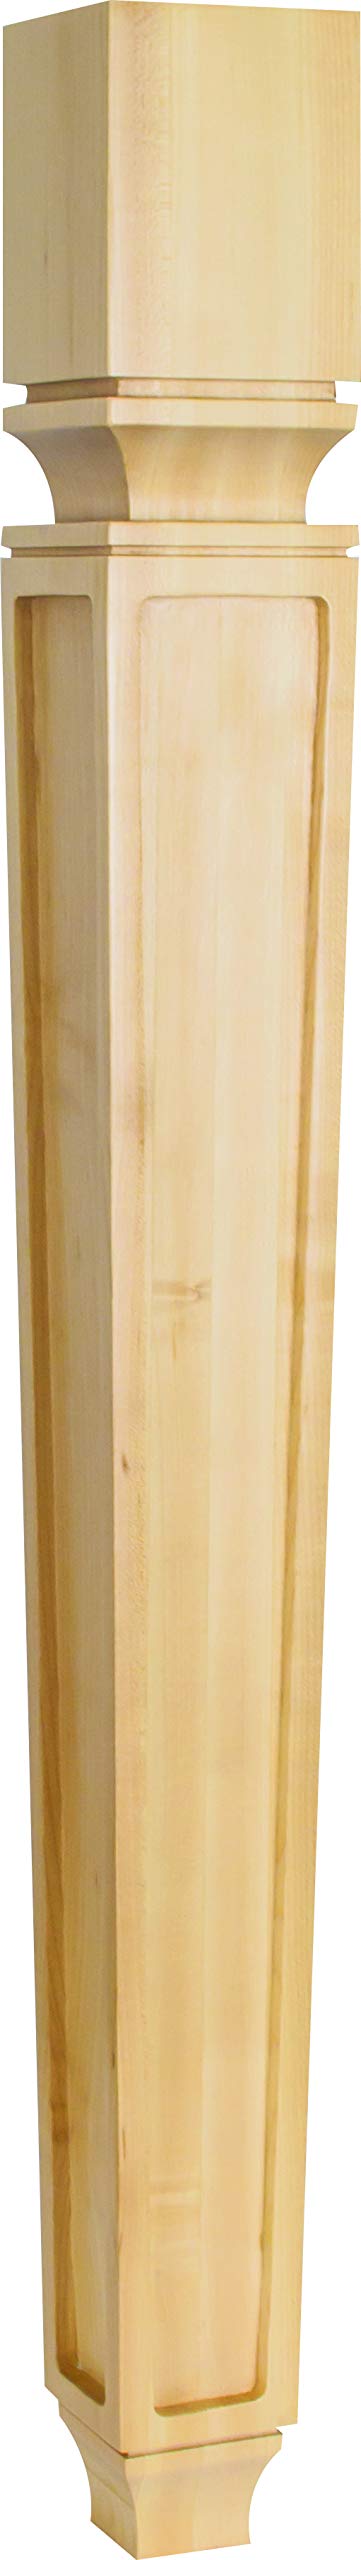 Hardware Resources P83-5-RW 5" W x 5" D x 35-1/2" H Rubberwood Cathedral Turned Post